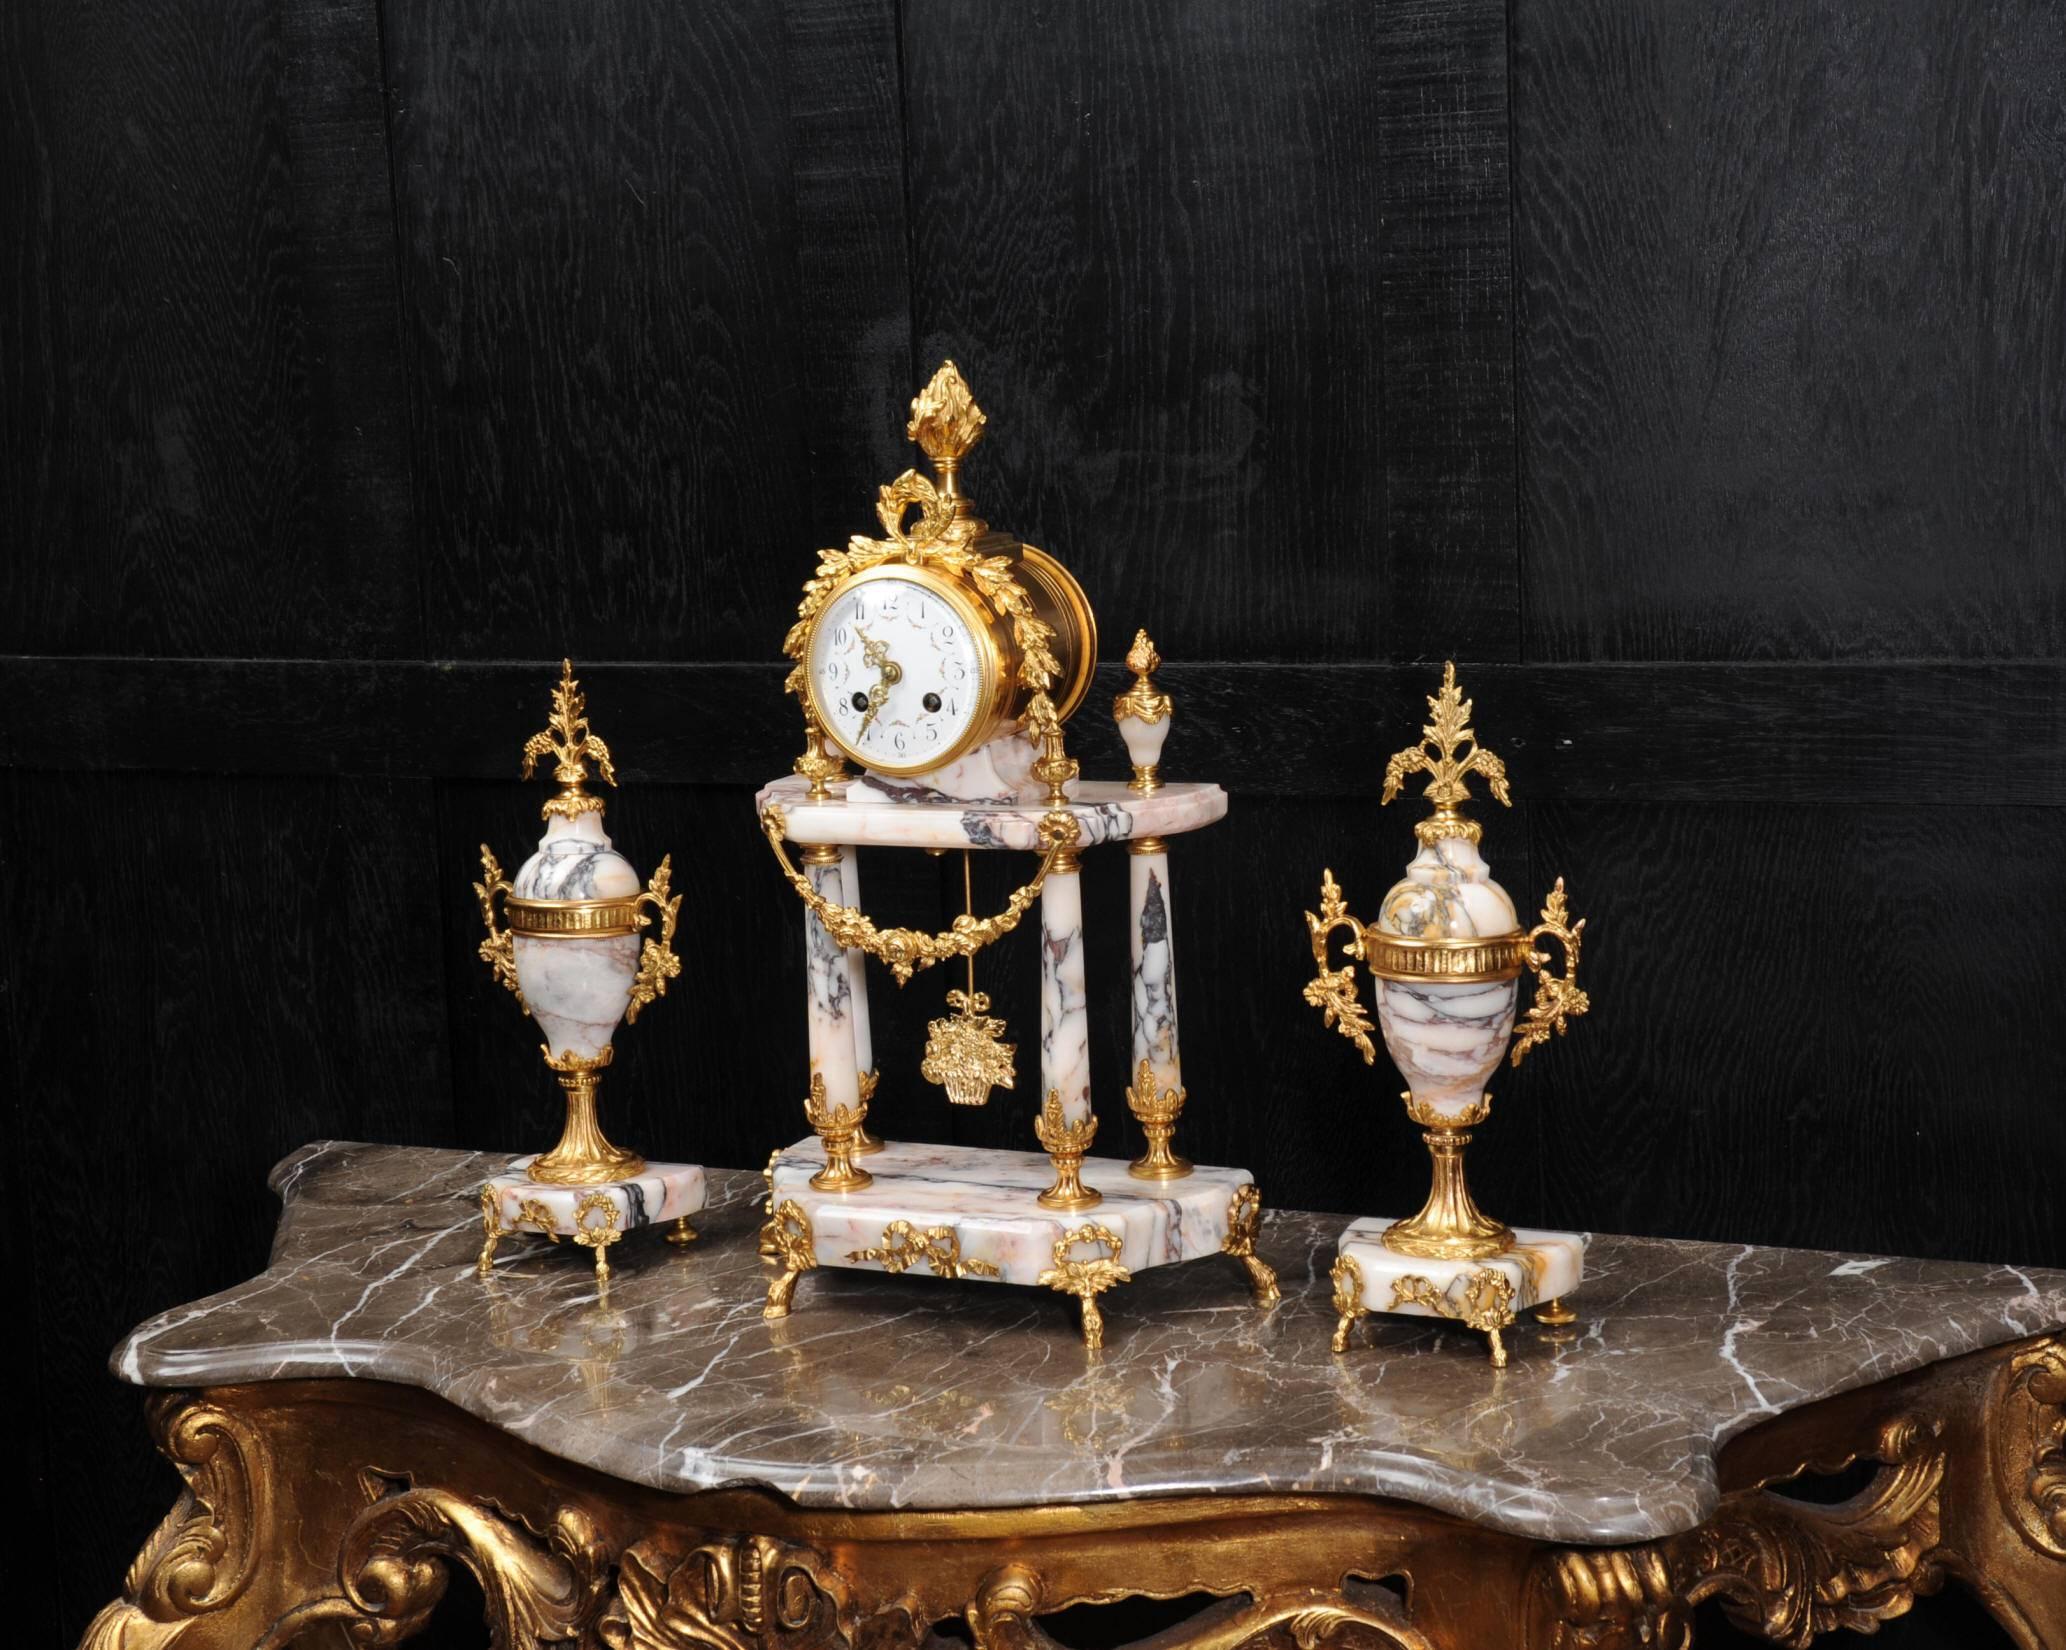 A stunning antique French portico clock set dating from circa 1900. It is made of the most beautiful variegated specimen marble, with salmon pink and silver grey veining, mounted with finely finished ormolu (gilded bronze). It is classical in style,